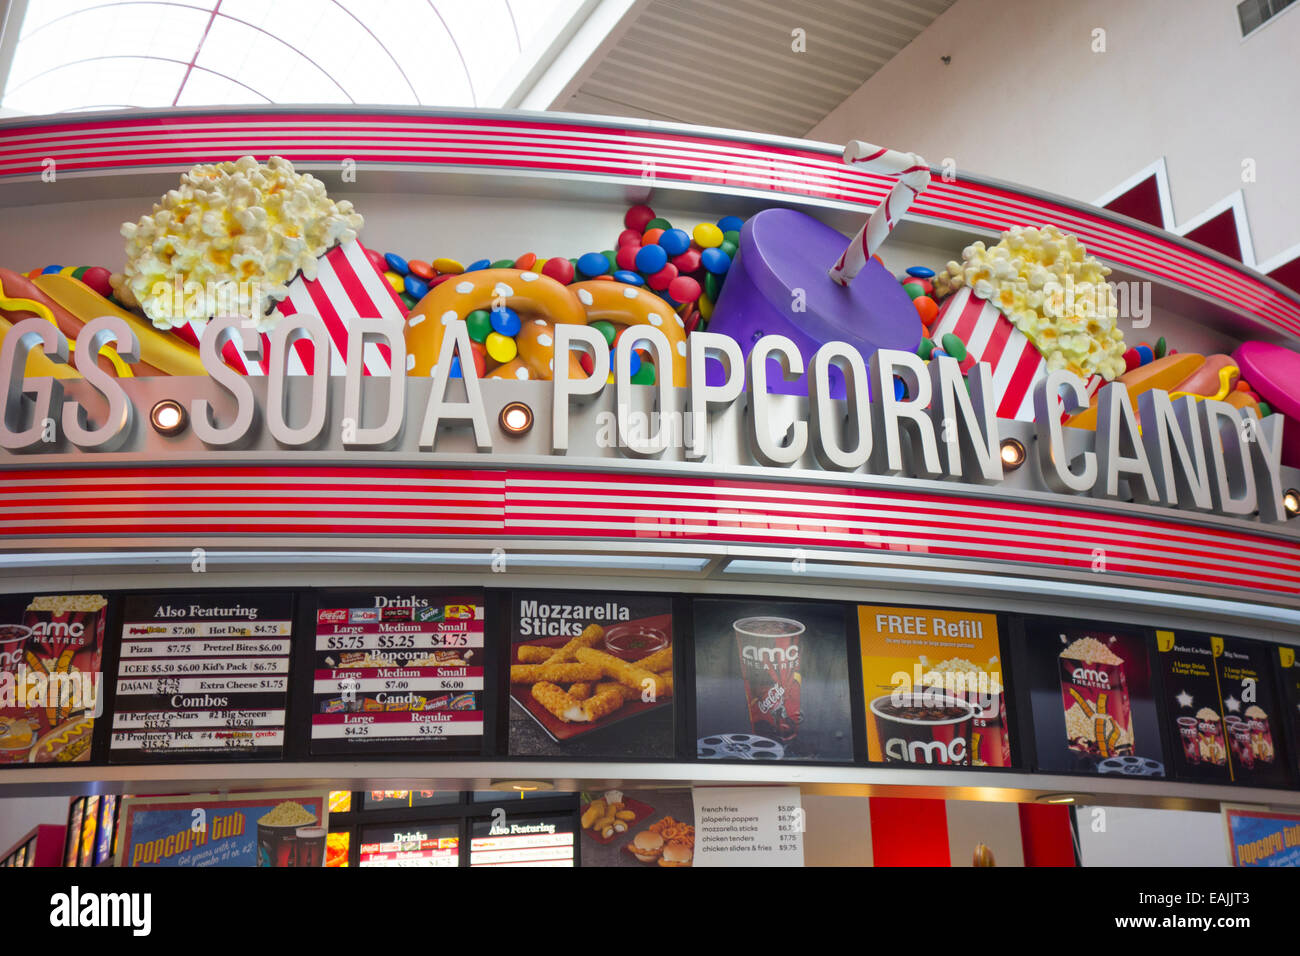 movie theater concession stand Stock Photo